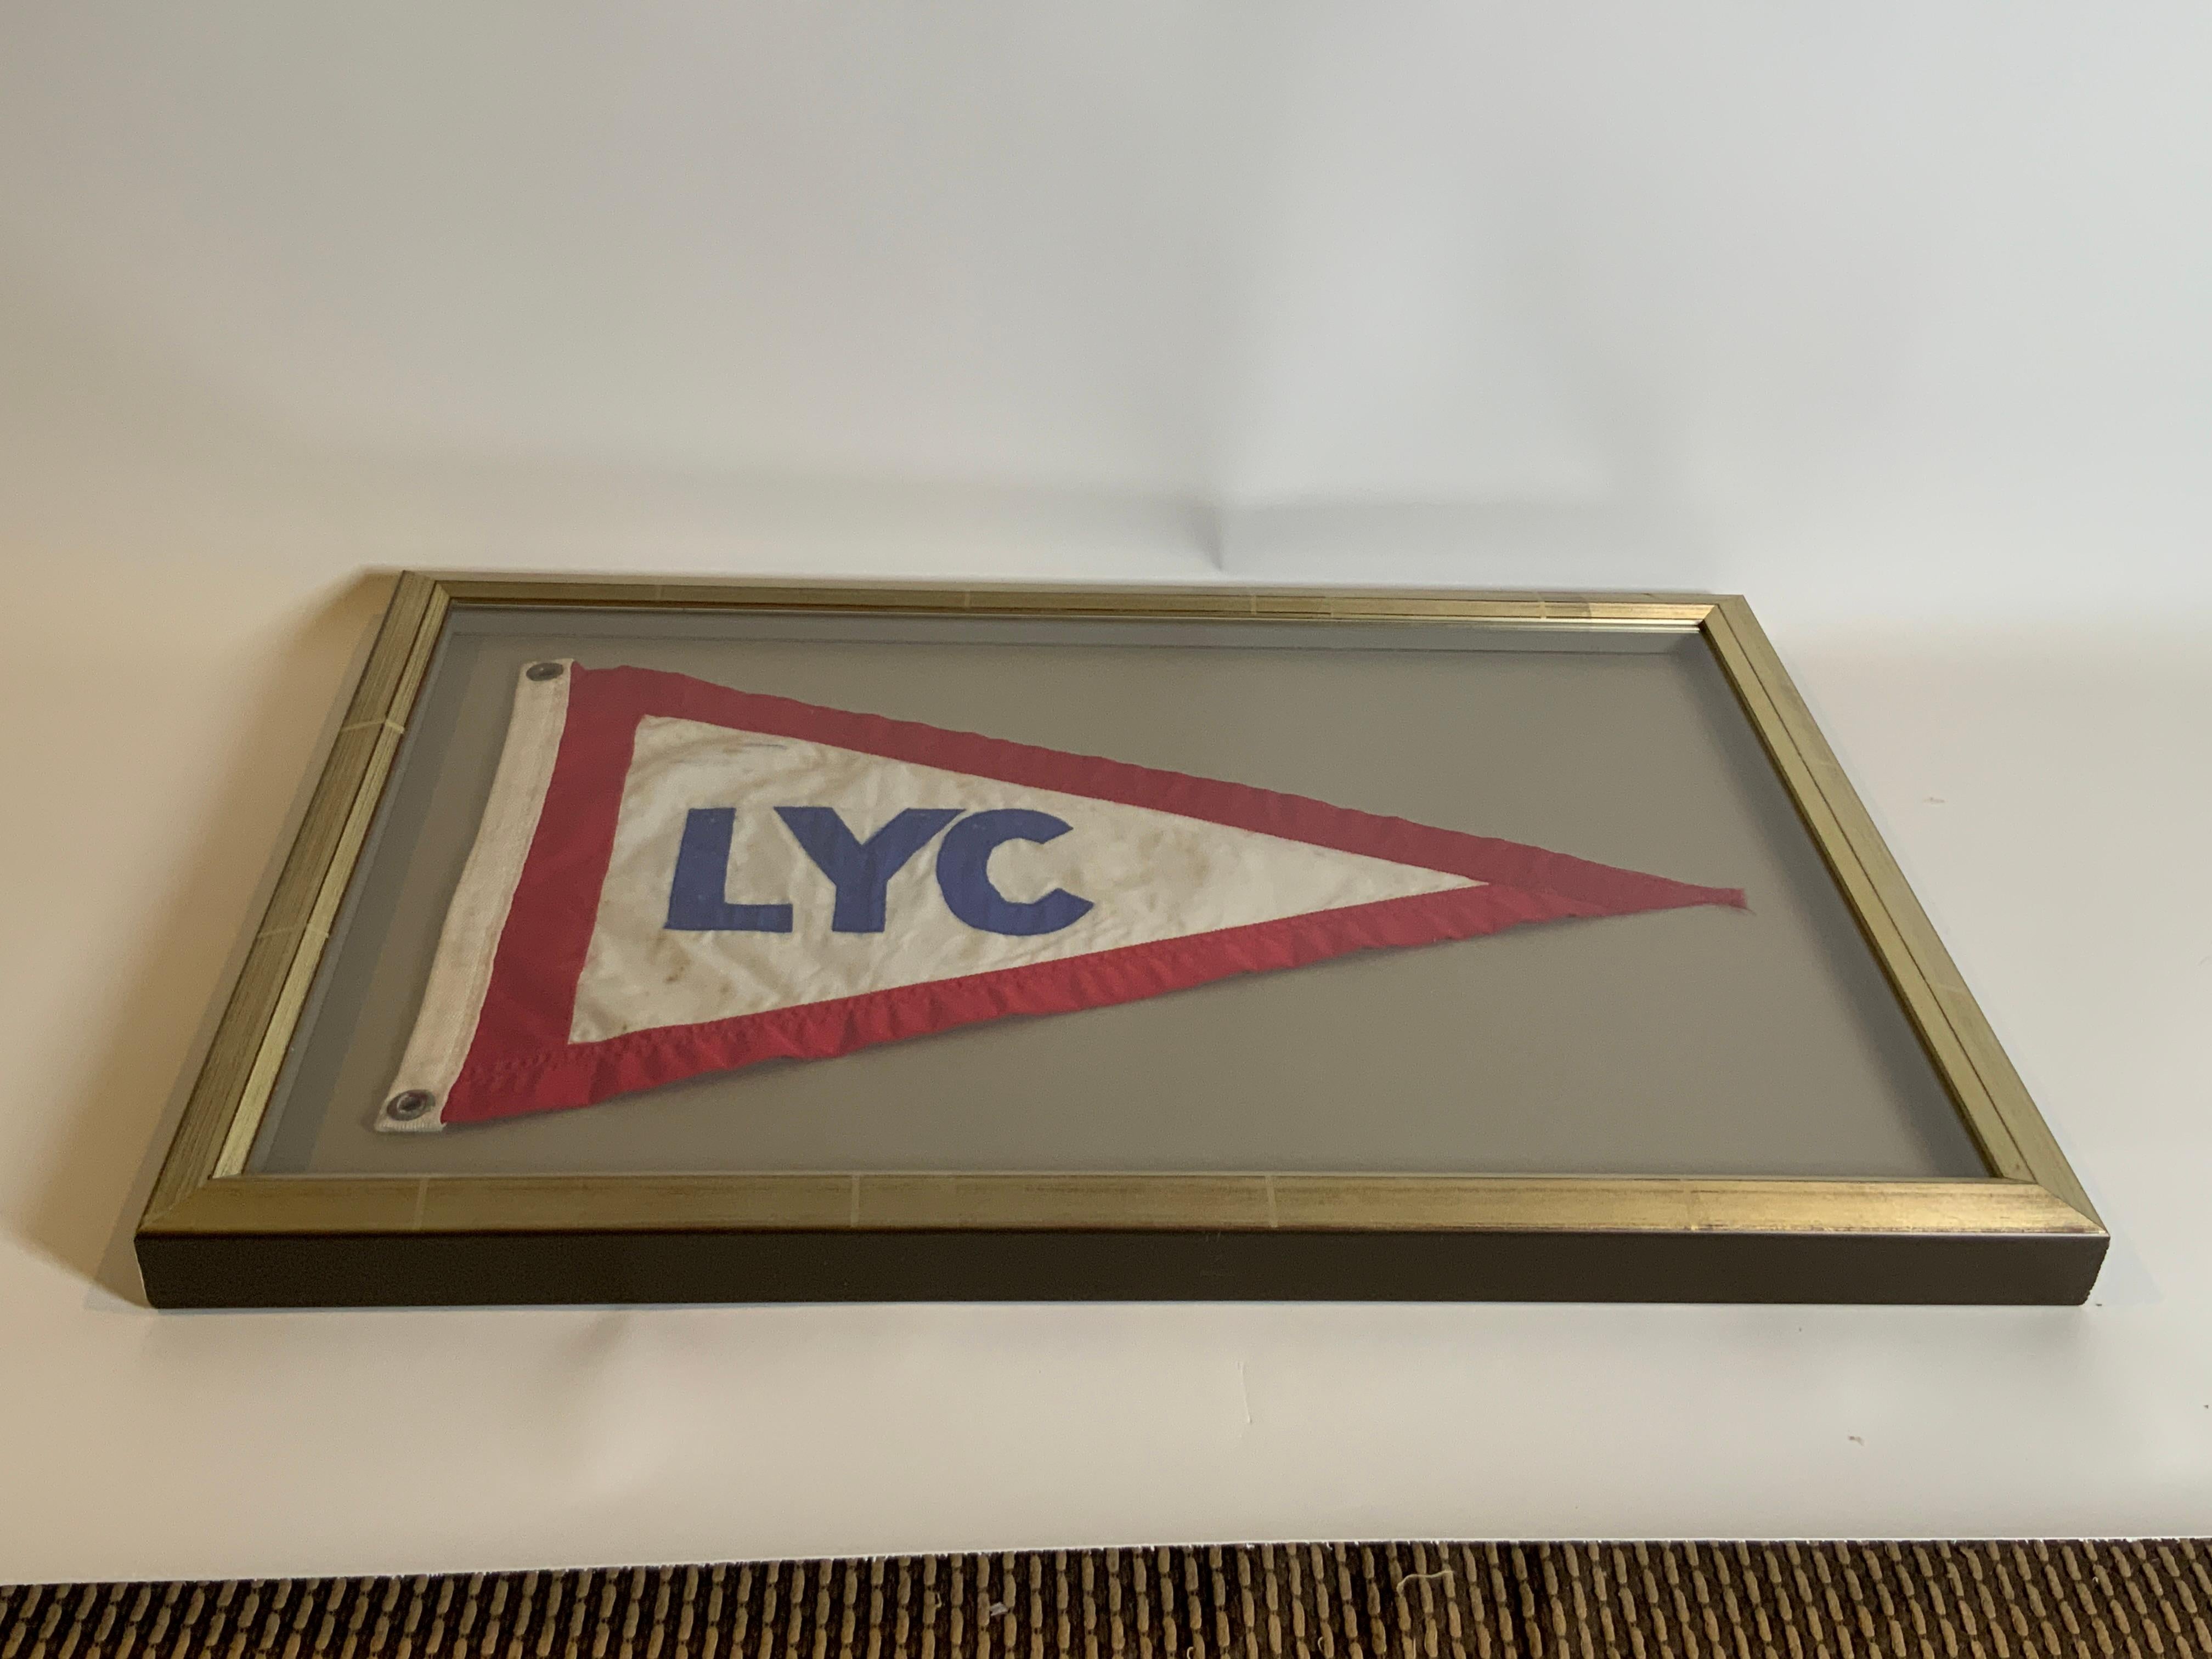 Late 20th Century Vintage Lauderdale Yacht Club Framed Burgee For Sale